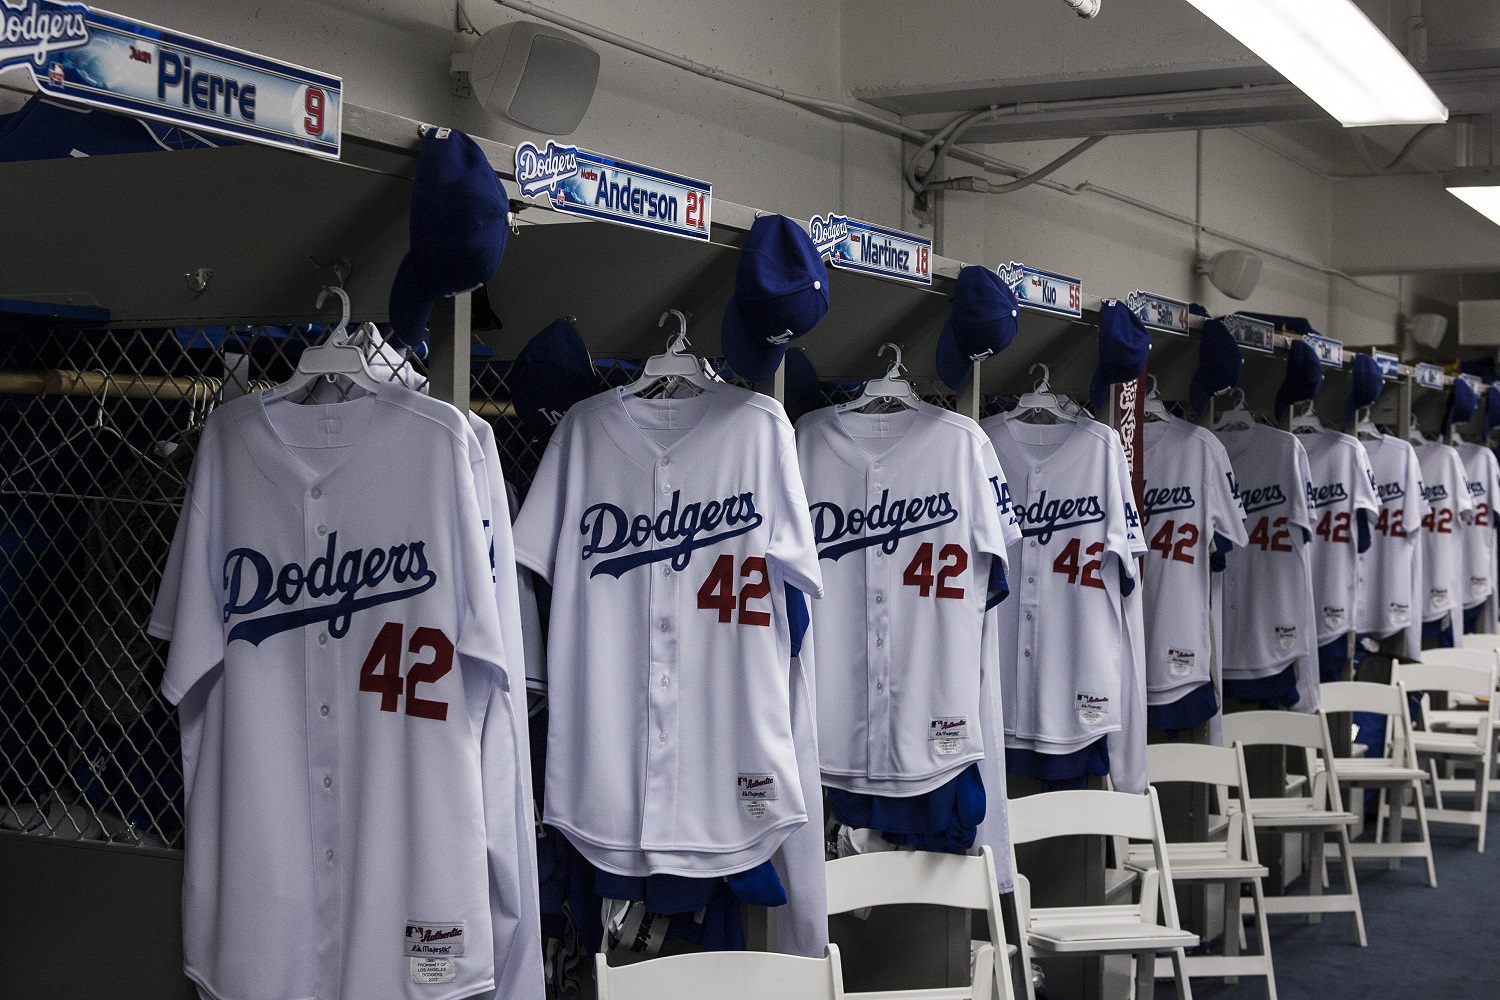 Today, we all wear 42. Thank you to - Los Angeles Dodgers